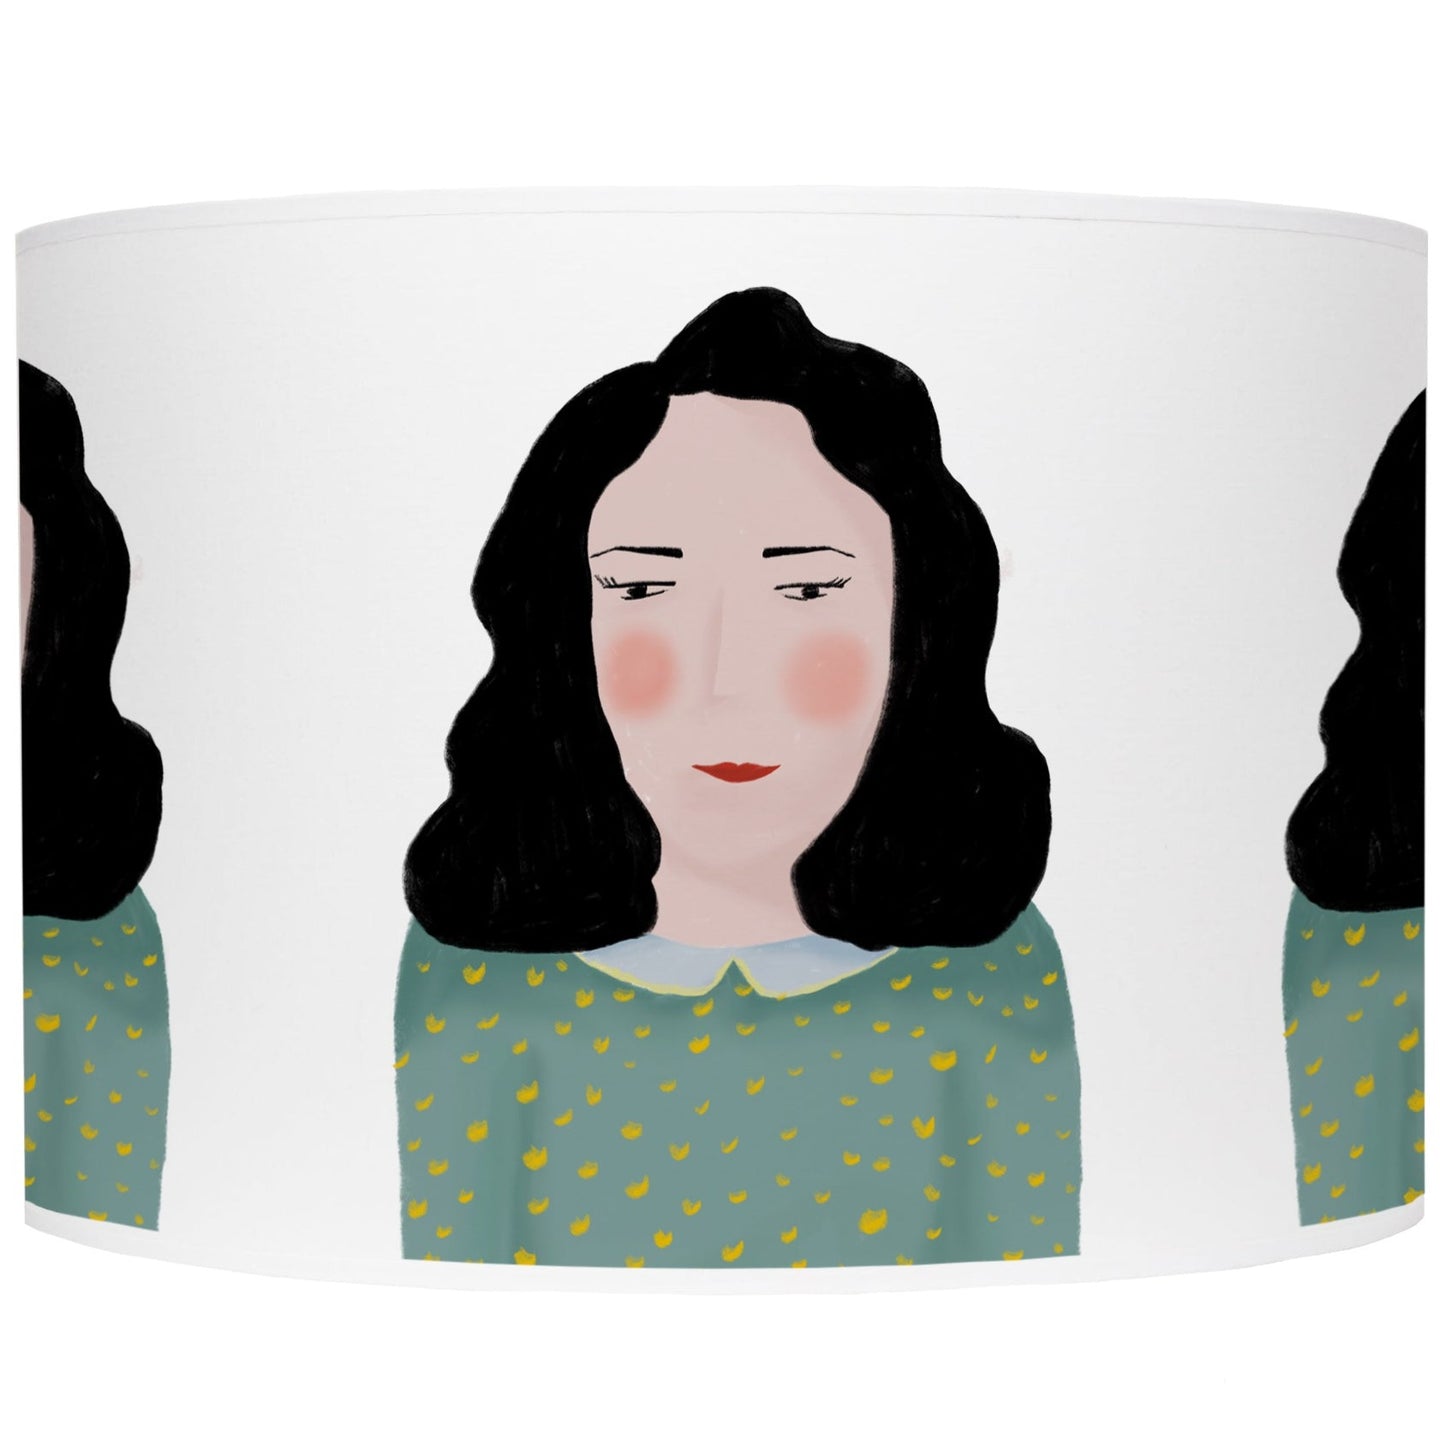 Portrait of lady lamp shade/ceiling shade